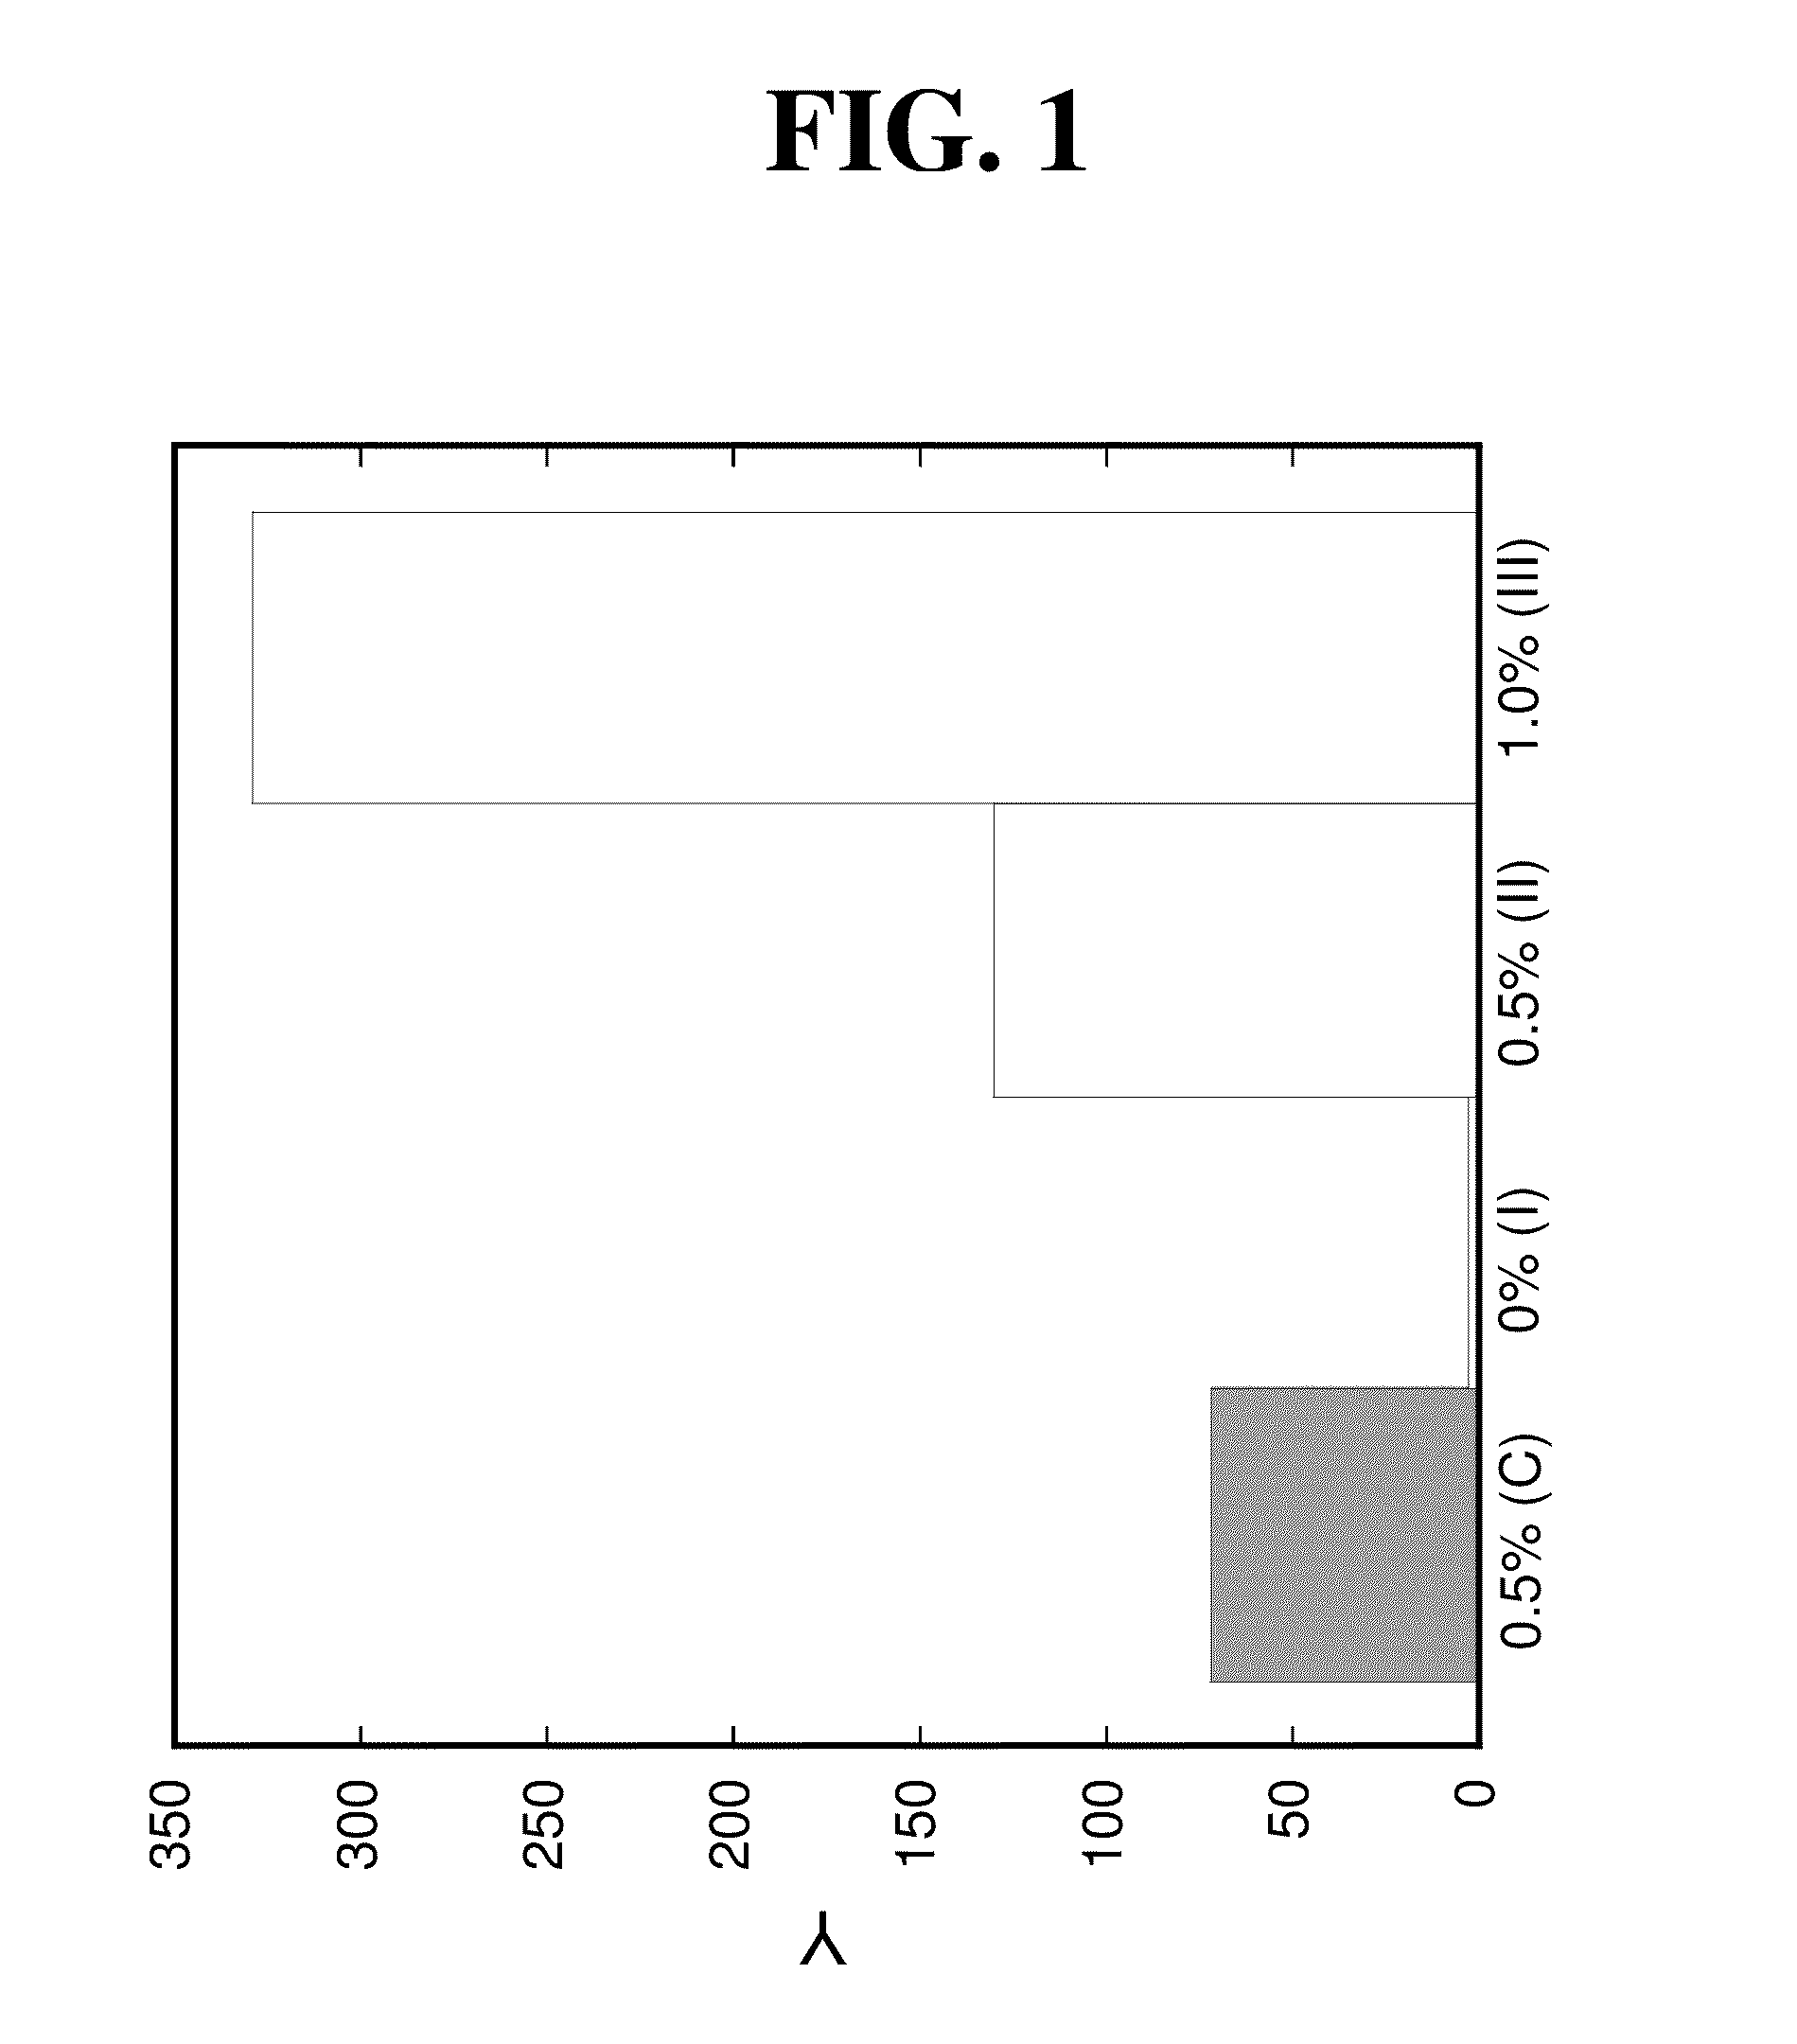 Rinse-Off Conditioning Composition Comprising a Near-Terminal Branched Alcohol